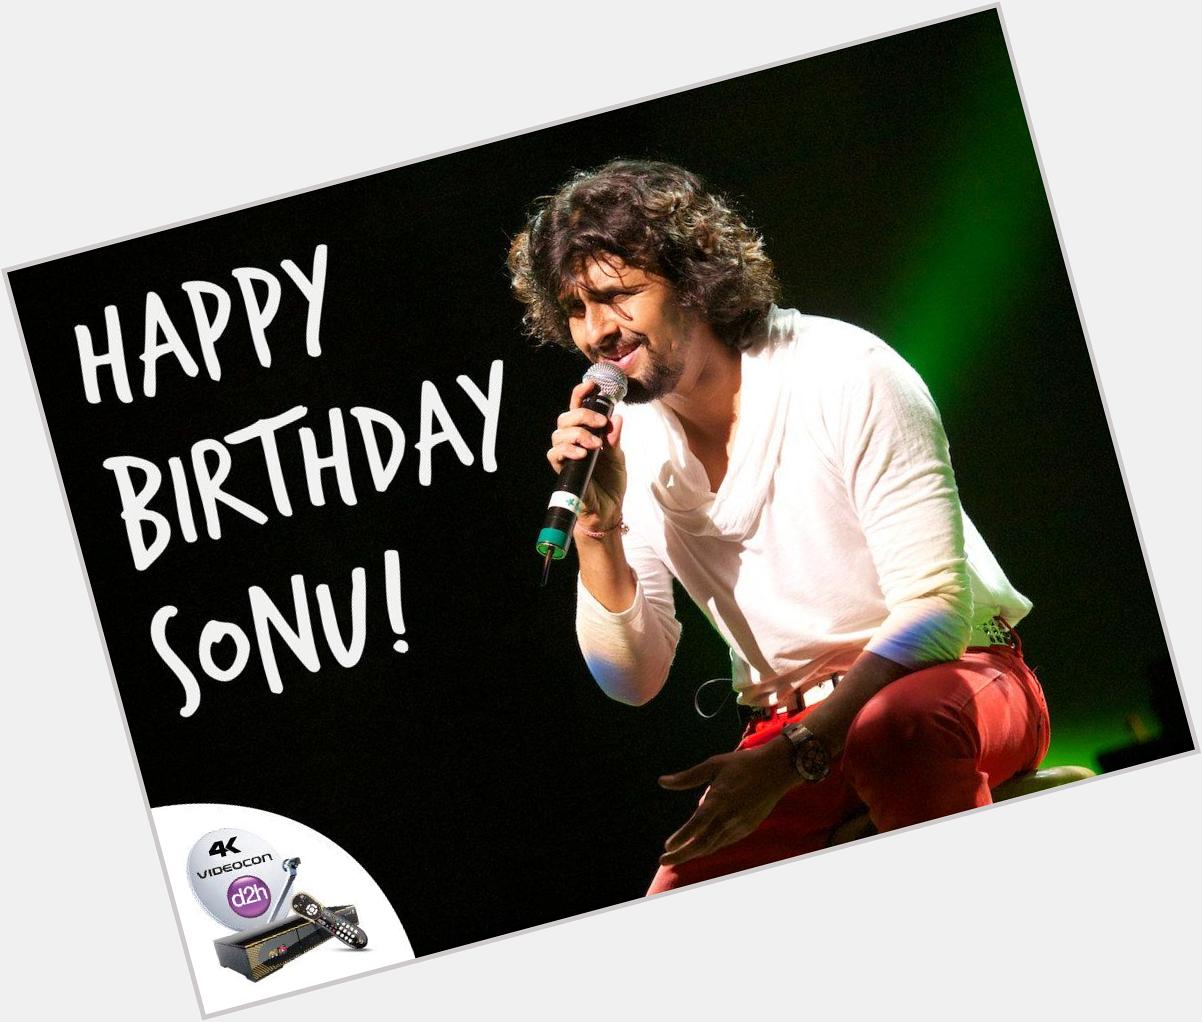 Happy Birthday Sonu Nigam!
Join us in wishing the man with the voice of an angel all the joy in the world. 